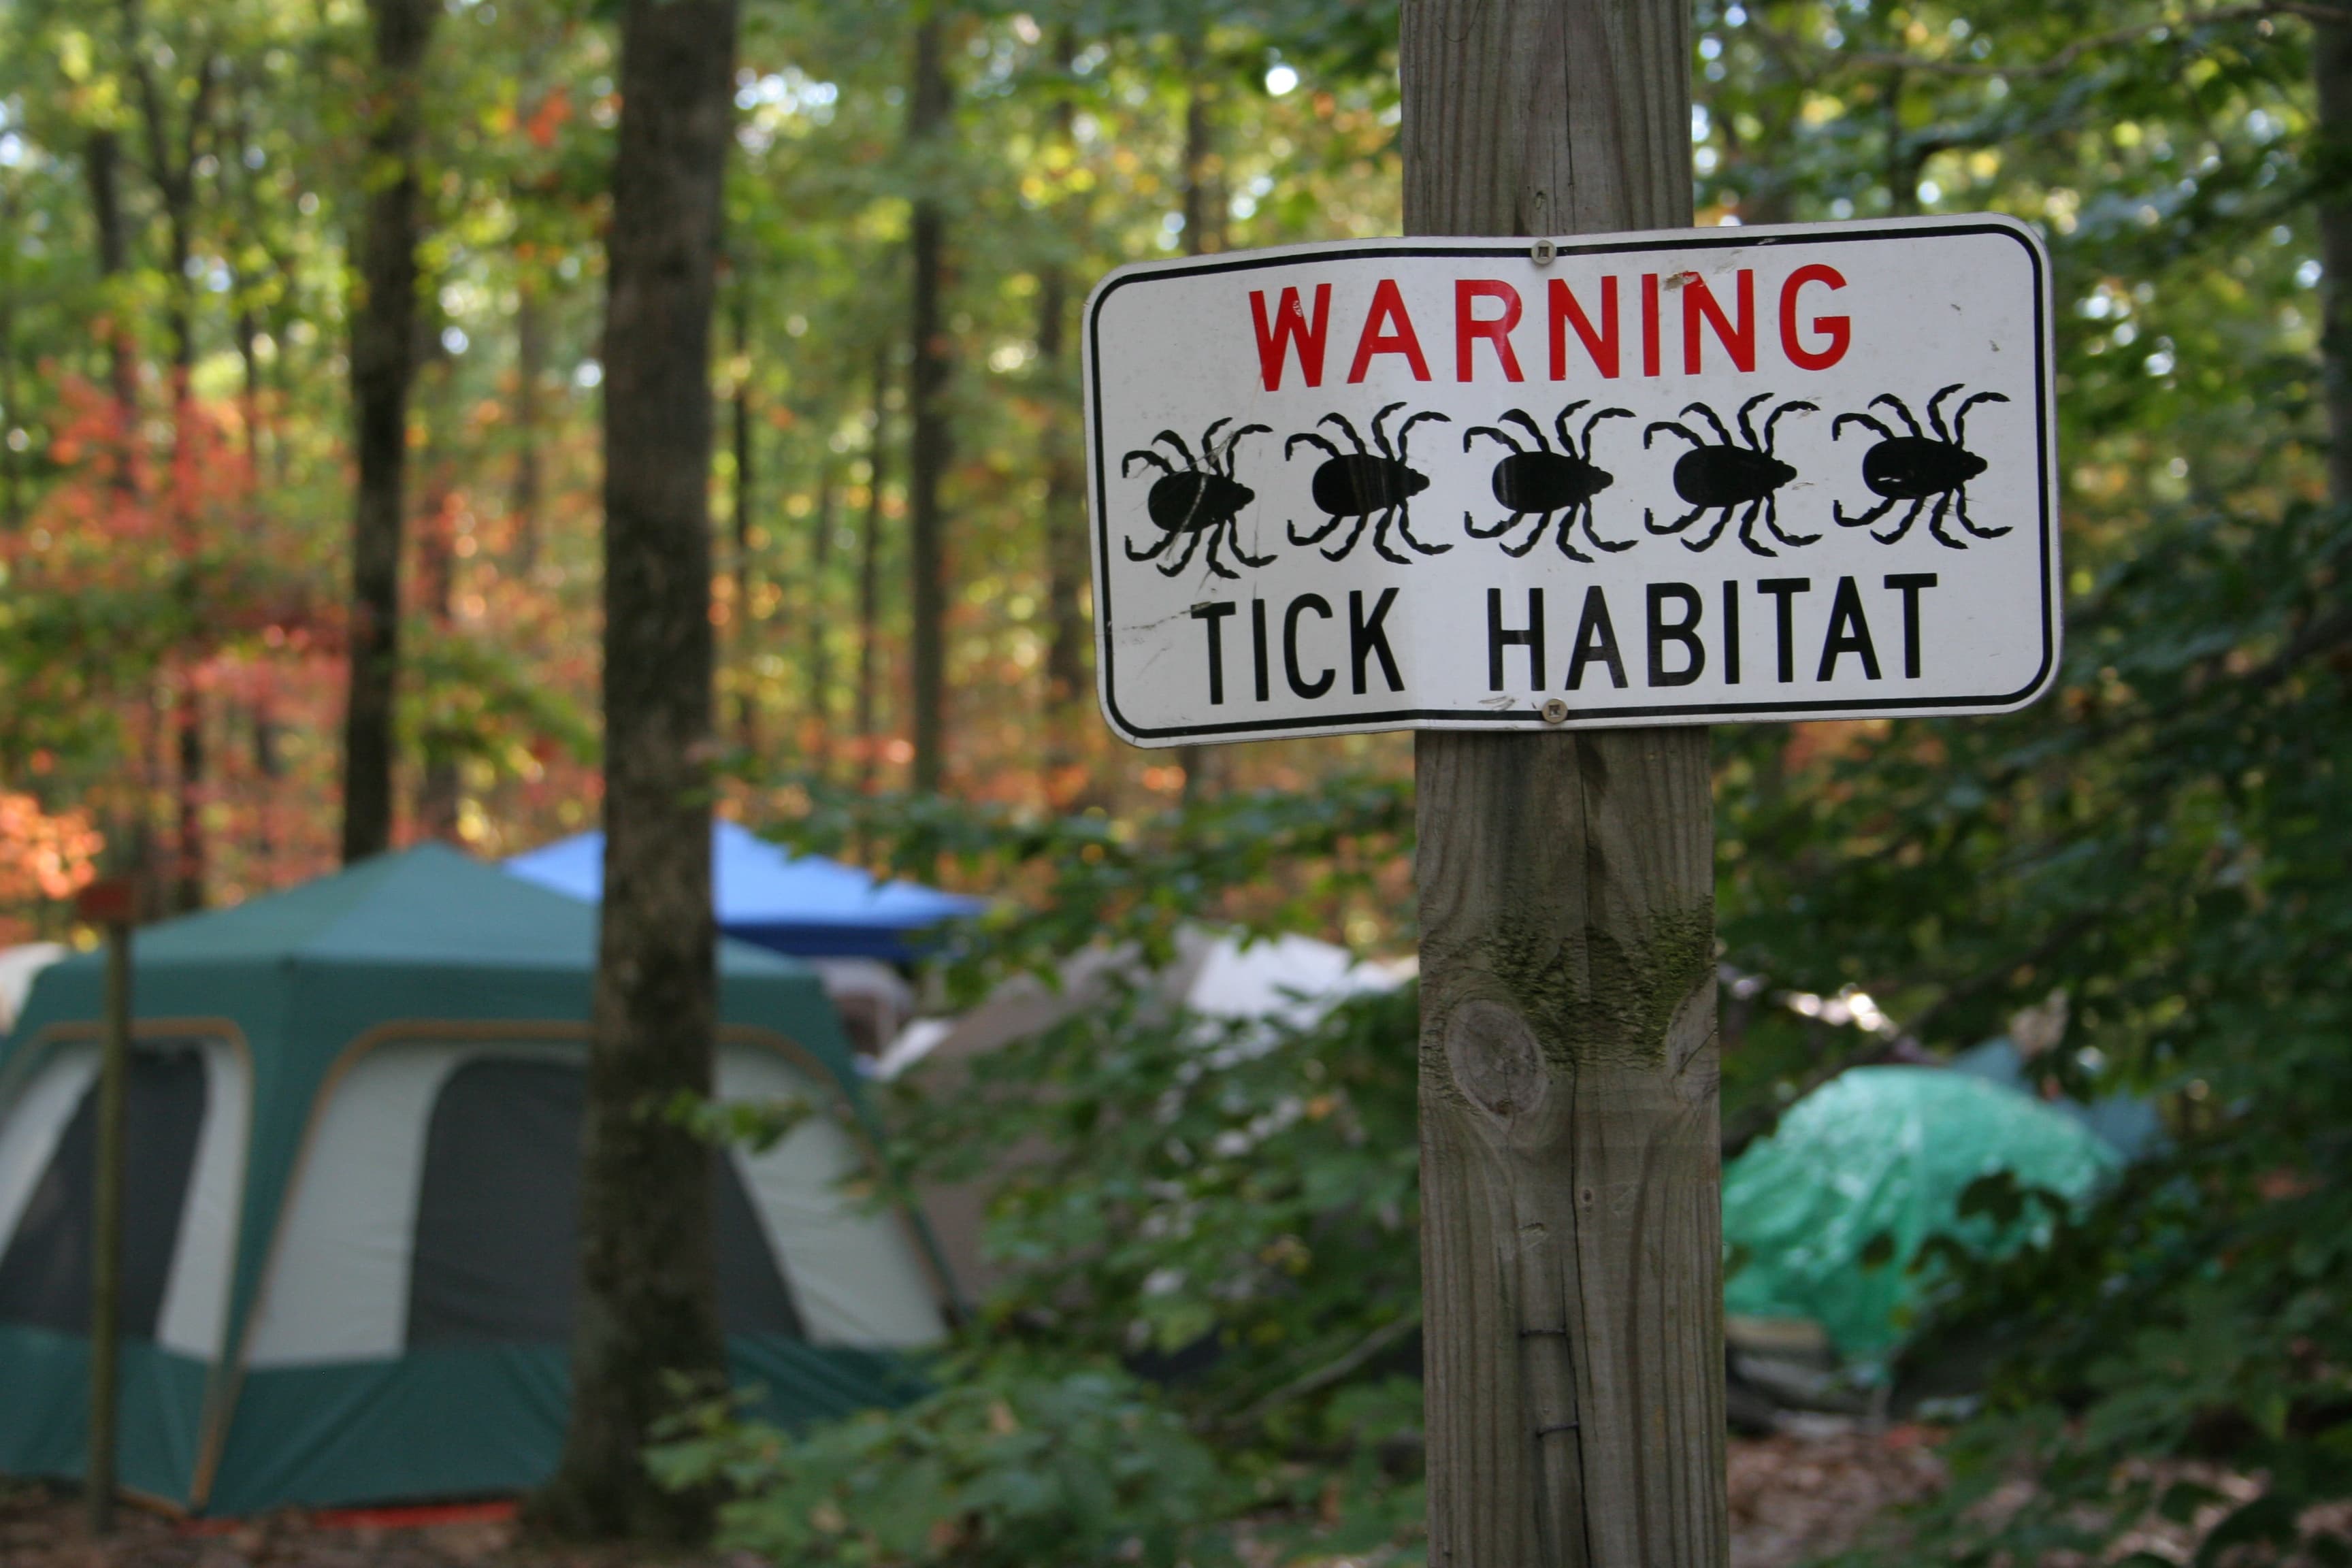 Outdoor Icon, Babe Winkelman, Guided by a Consortium of Leading Lyme Experts, Unveils his New Tick-Borne Illness Information Center in an Effort to Educate America on the Latest Tools and Prevention Tactics.